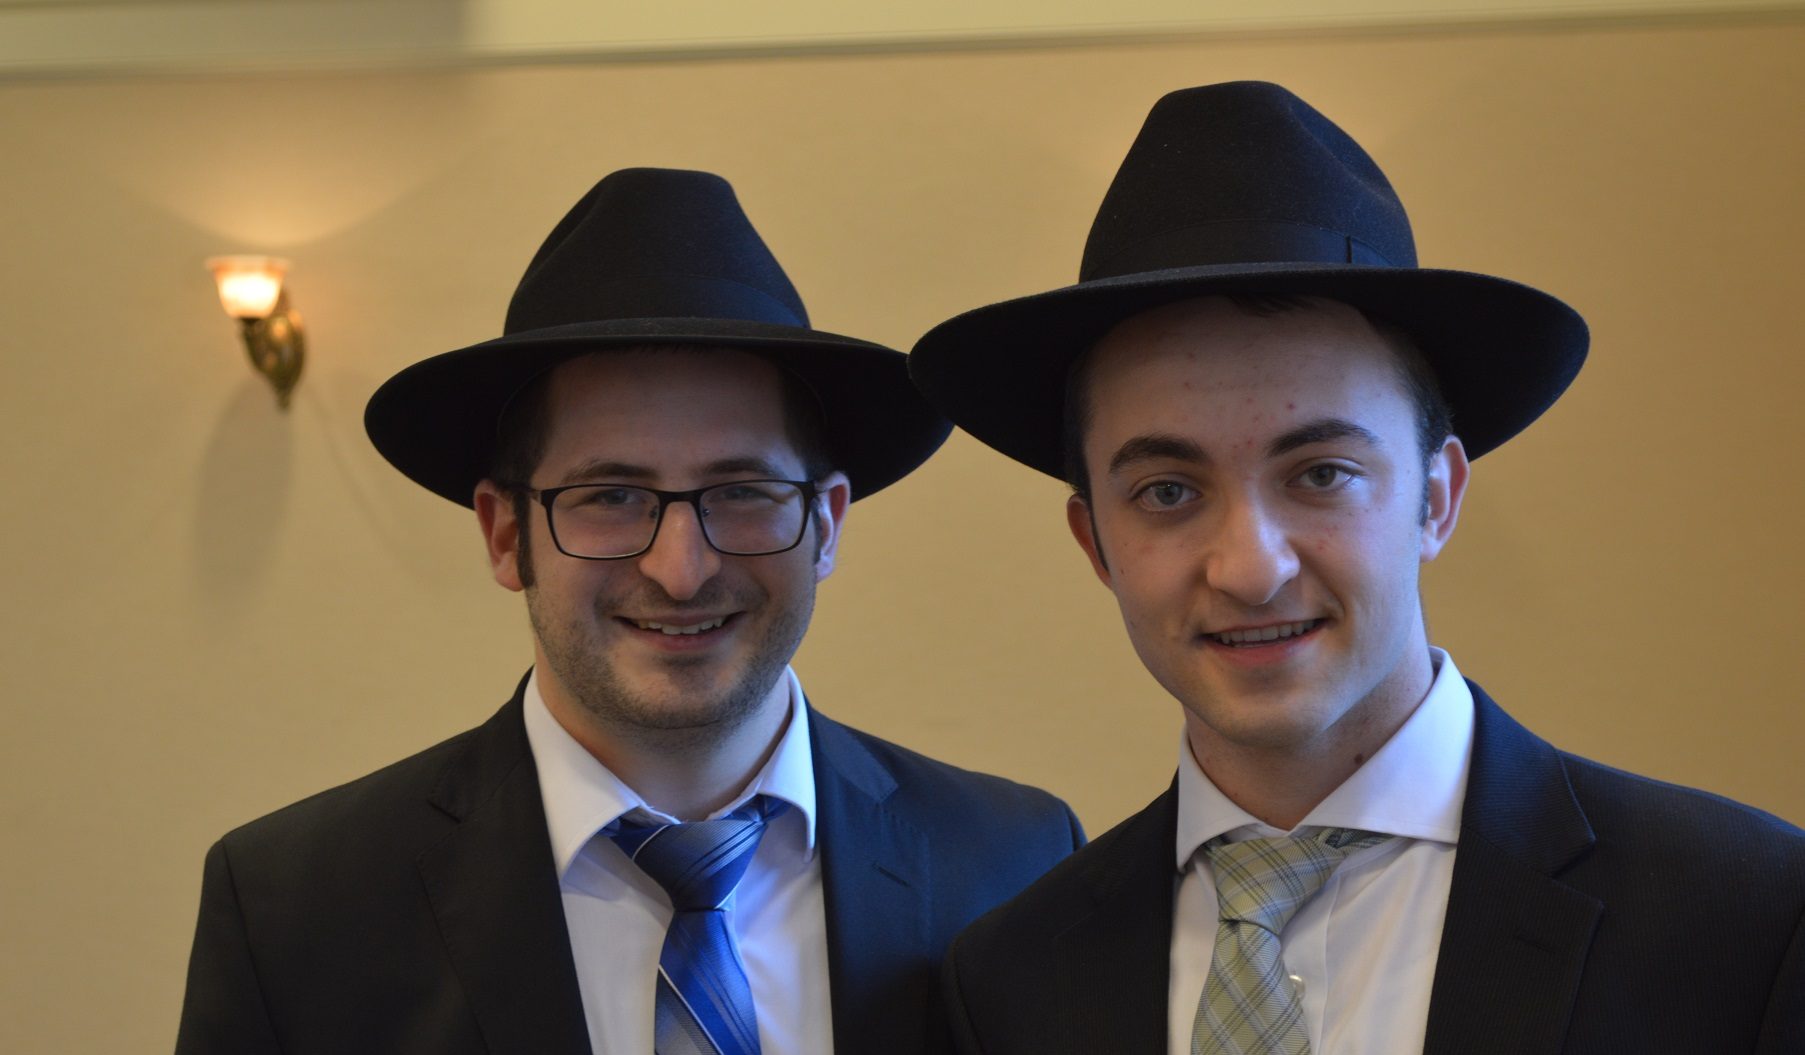 Baruch Rosenstein and Yechiel Brejt were two of the rabbinic students who led Kol Nidre services at North Oaks Senior Community in Pikesville, Maryland. (Anthony C. Hayes)